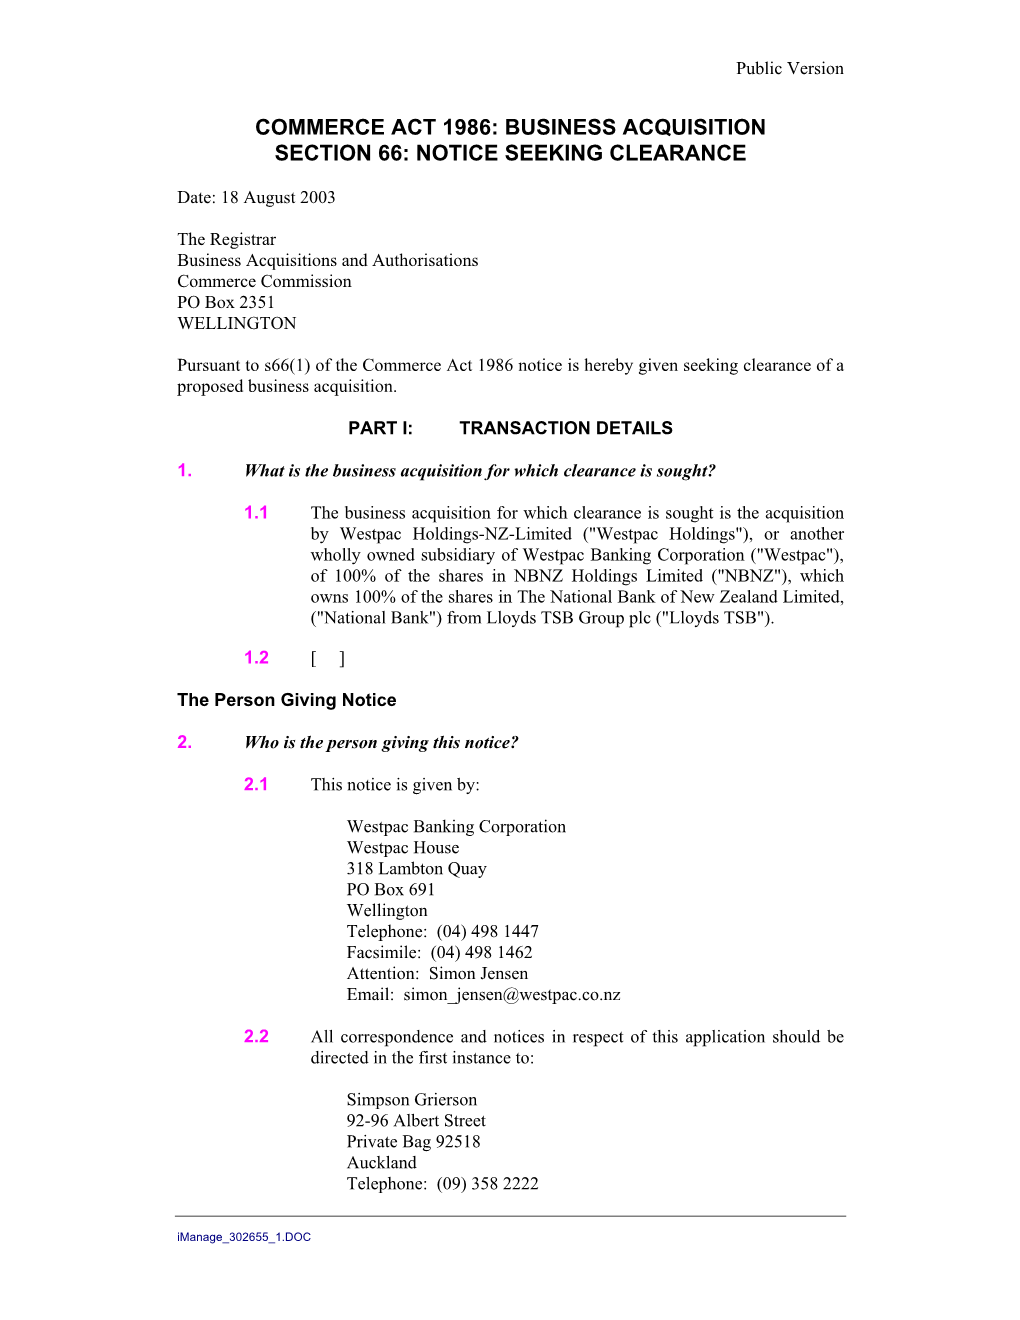 Business Acquisition Section 66: Notice Seeking Clearance